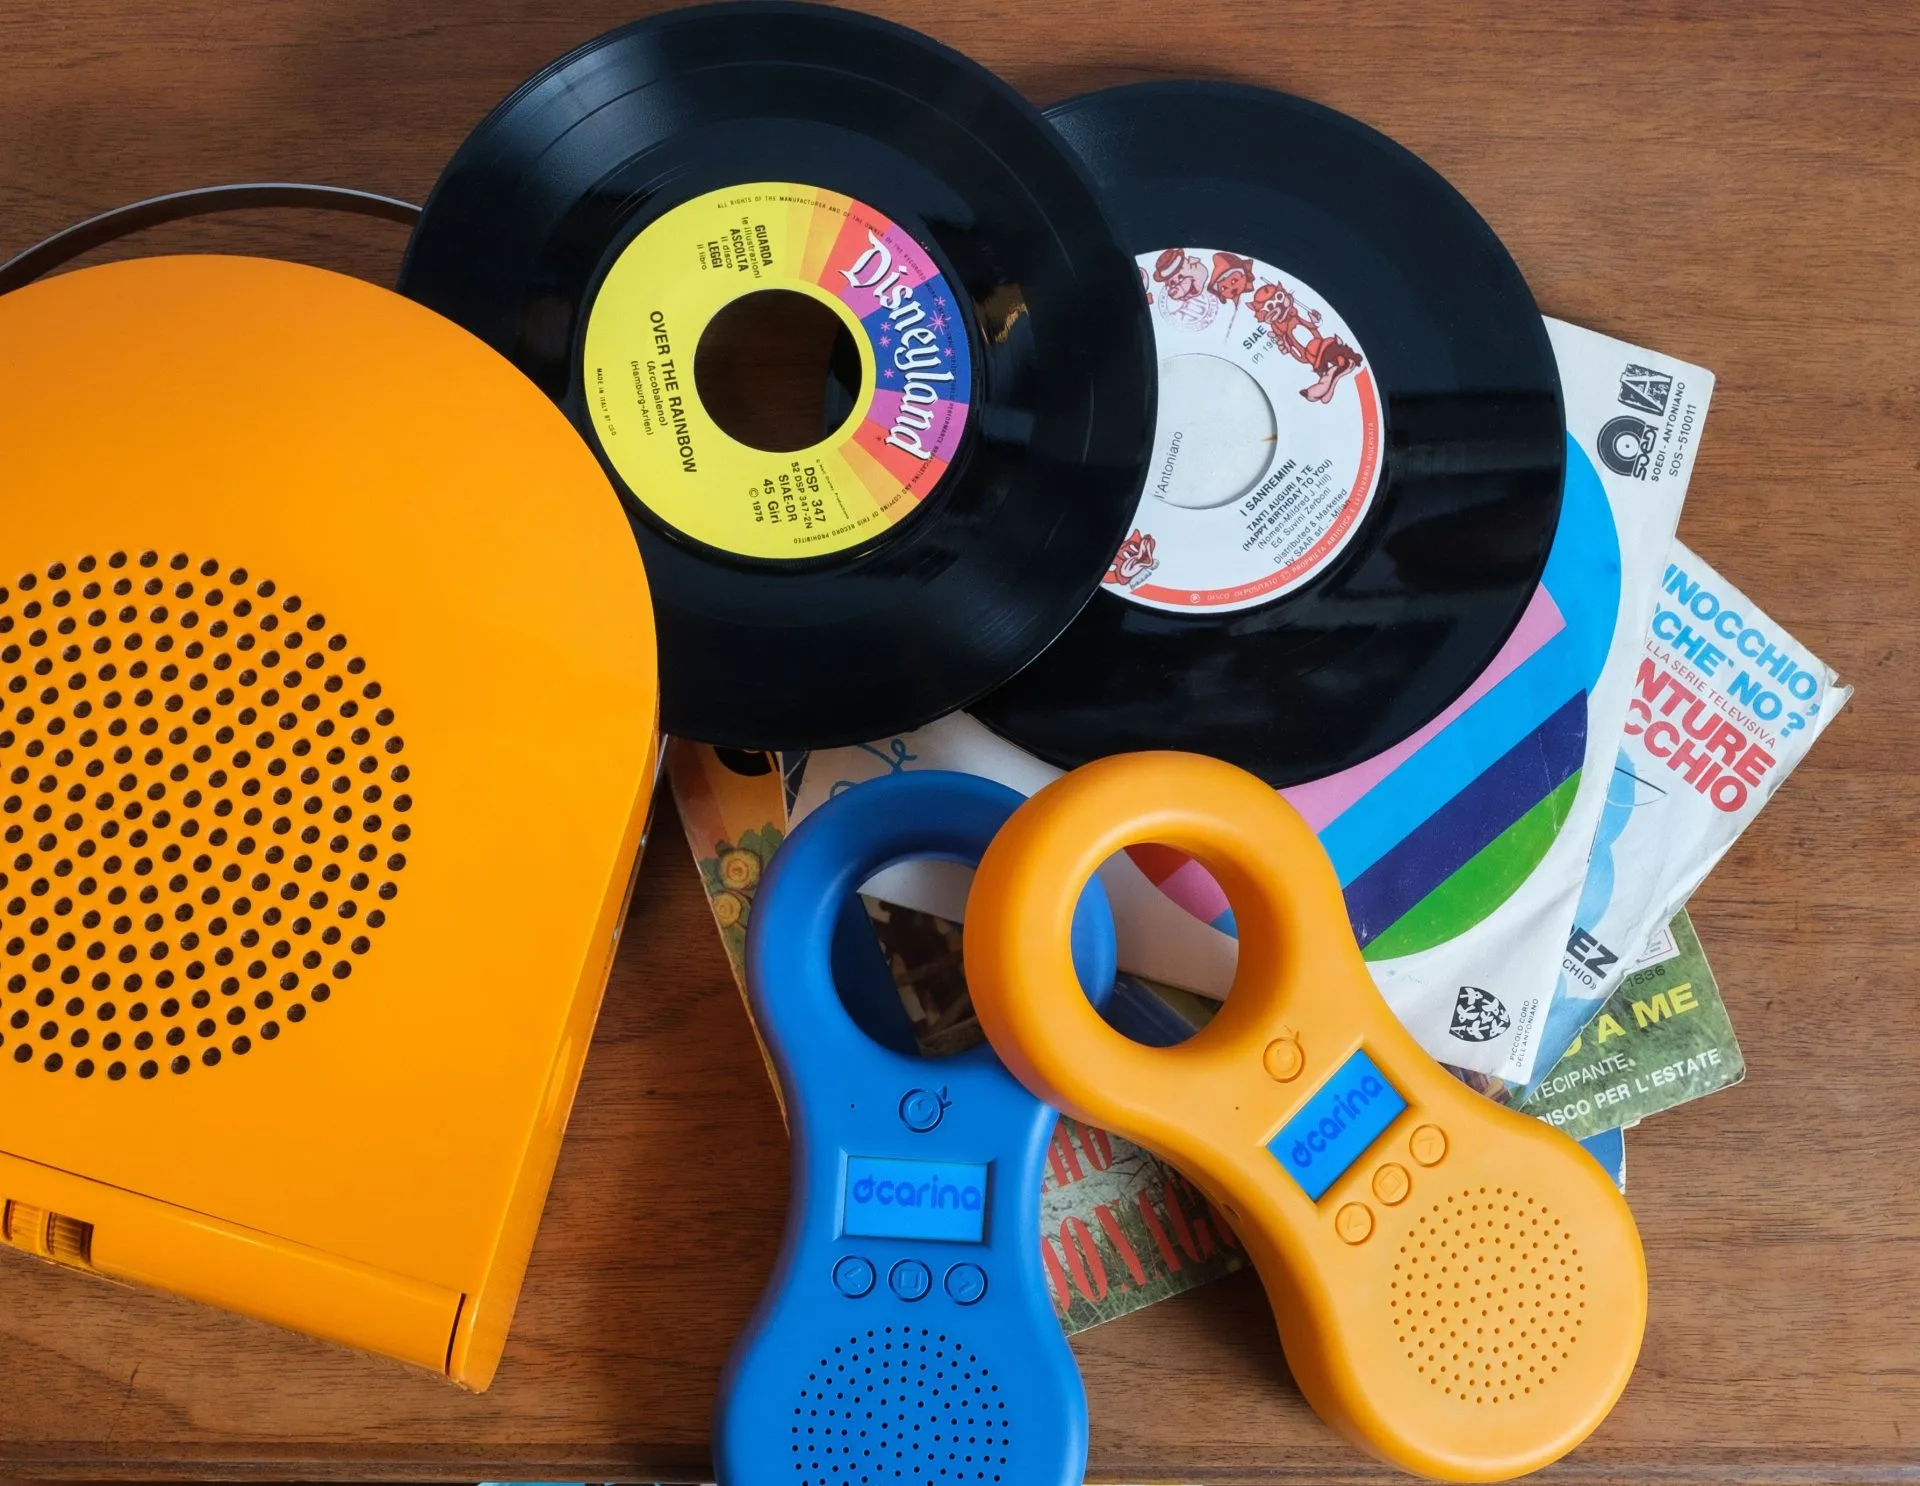 History of portable music